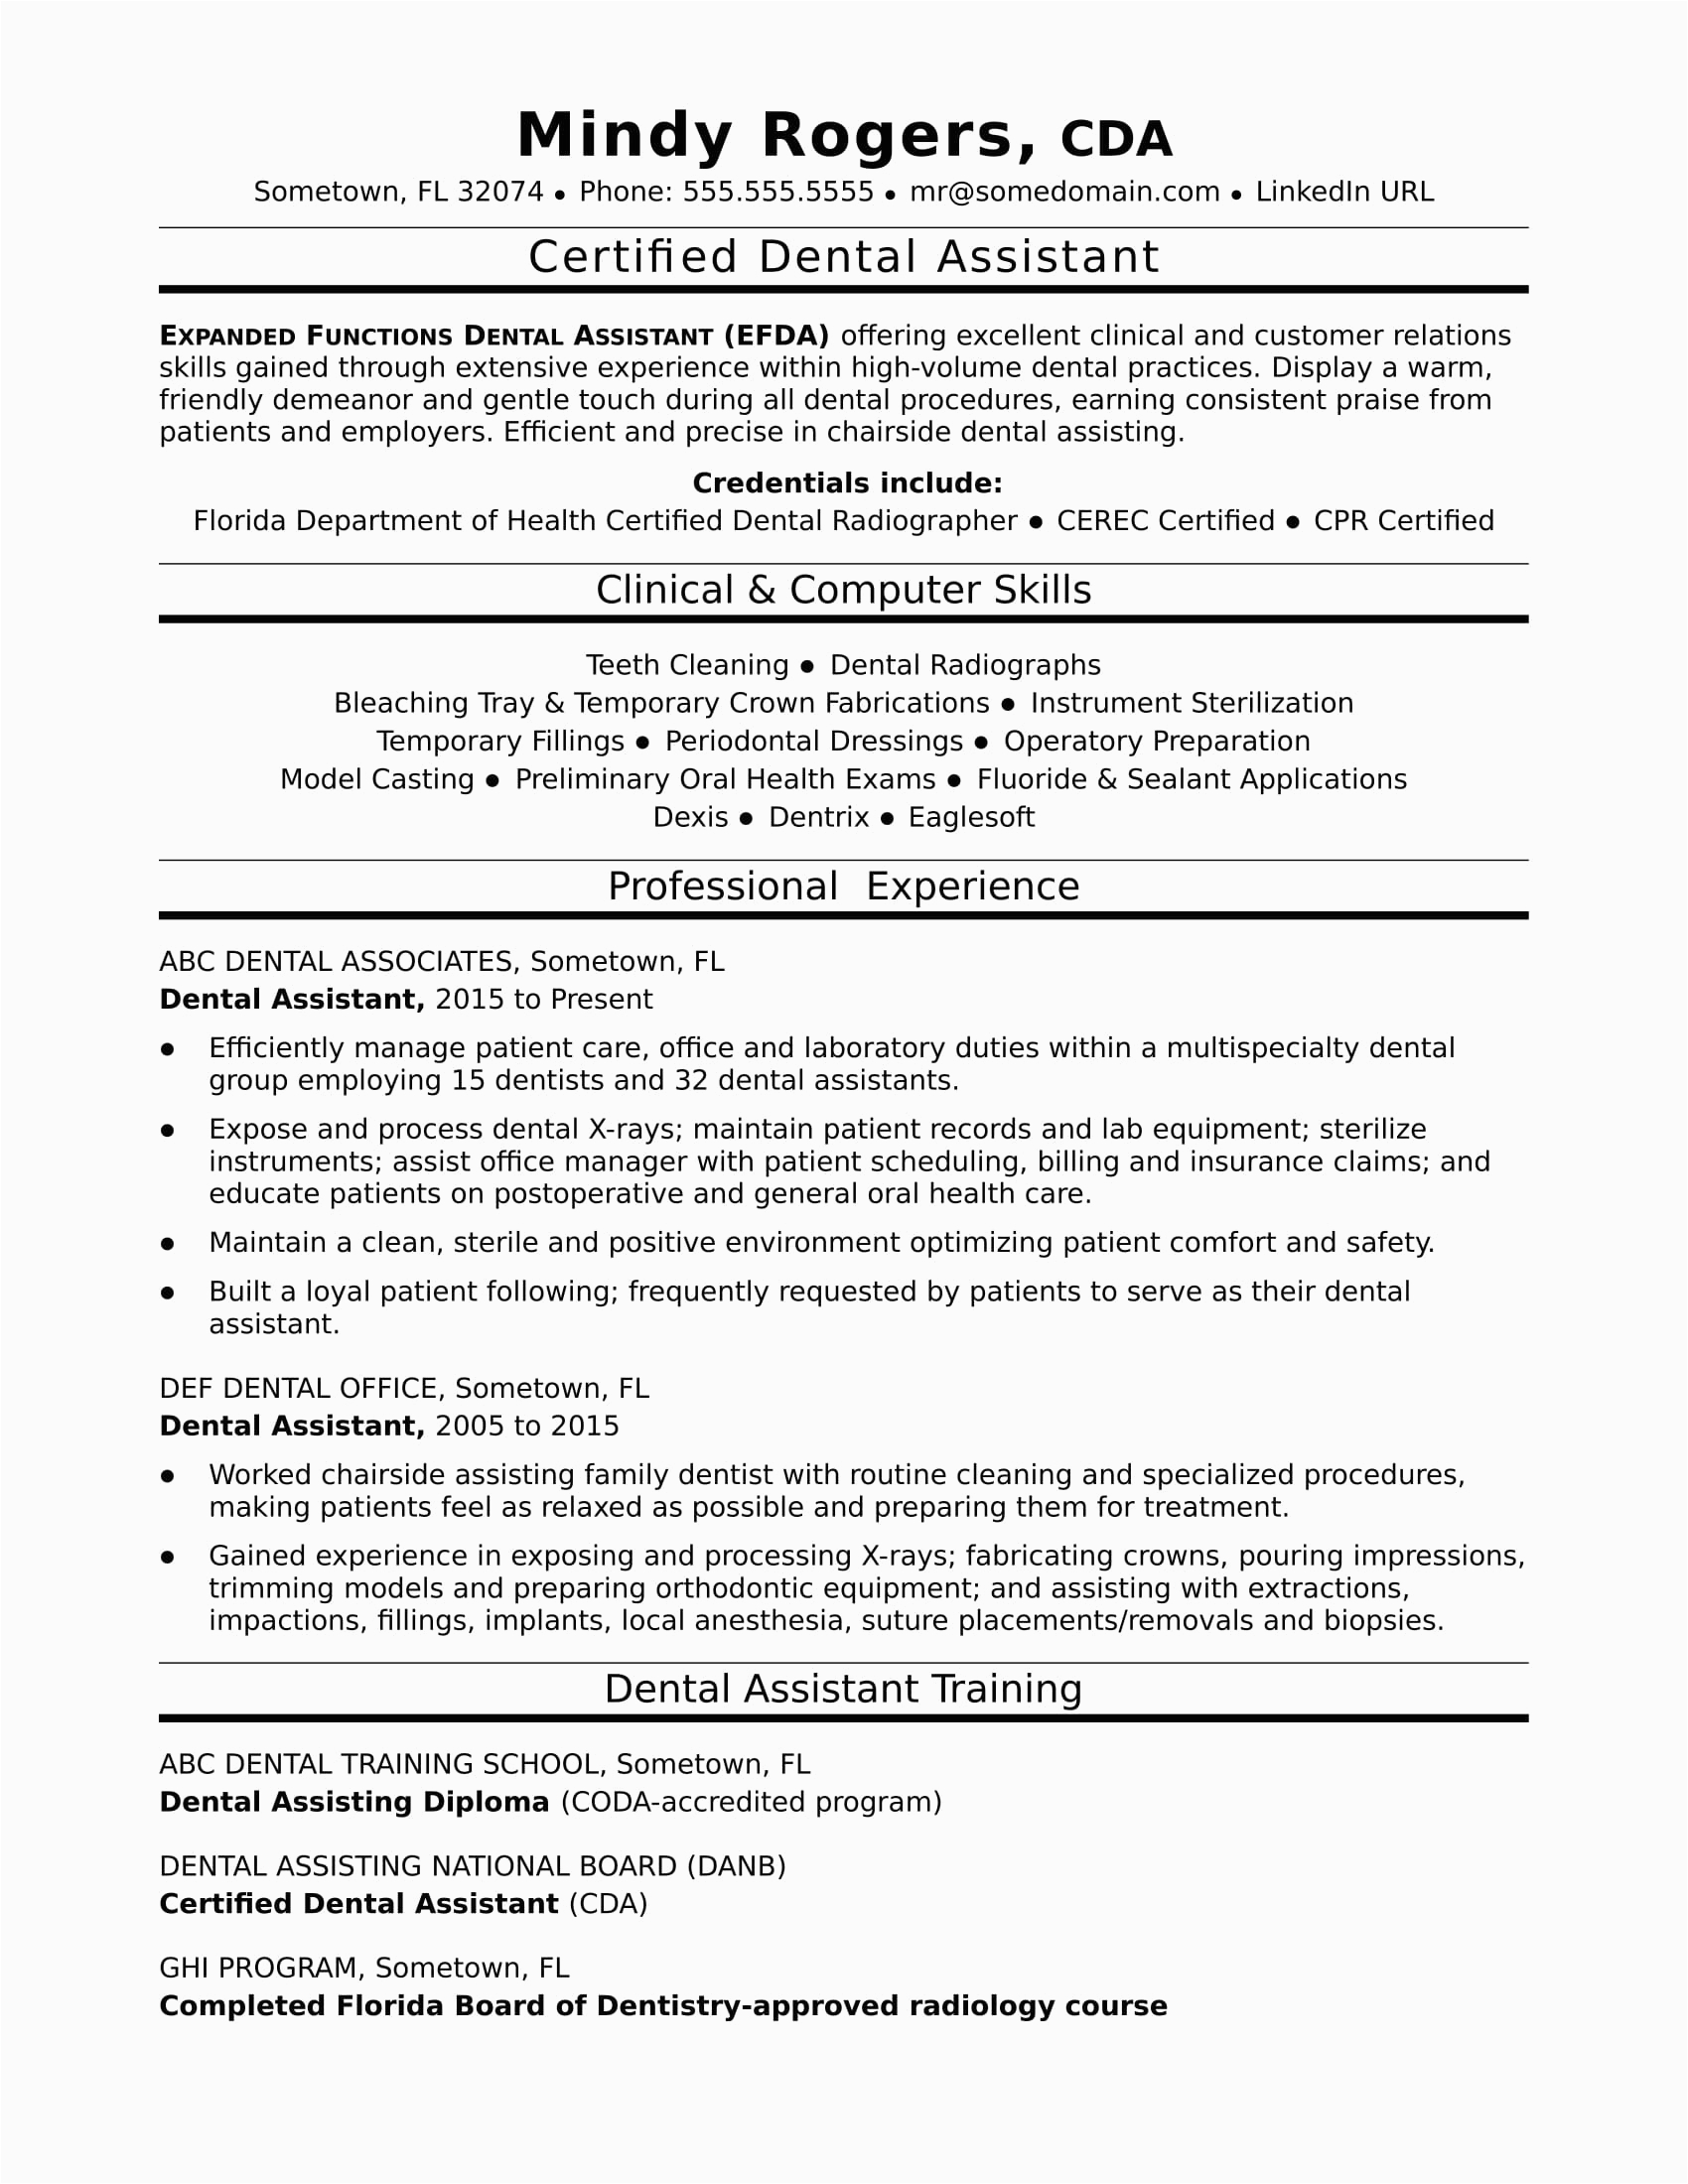 Sample Resume for Dental assistant with No Experience Dental assistant Resume Samples